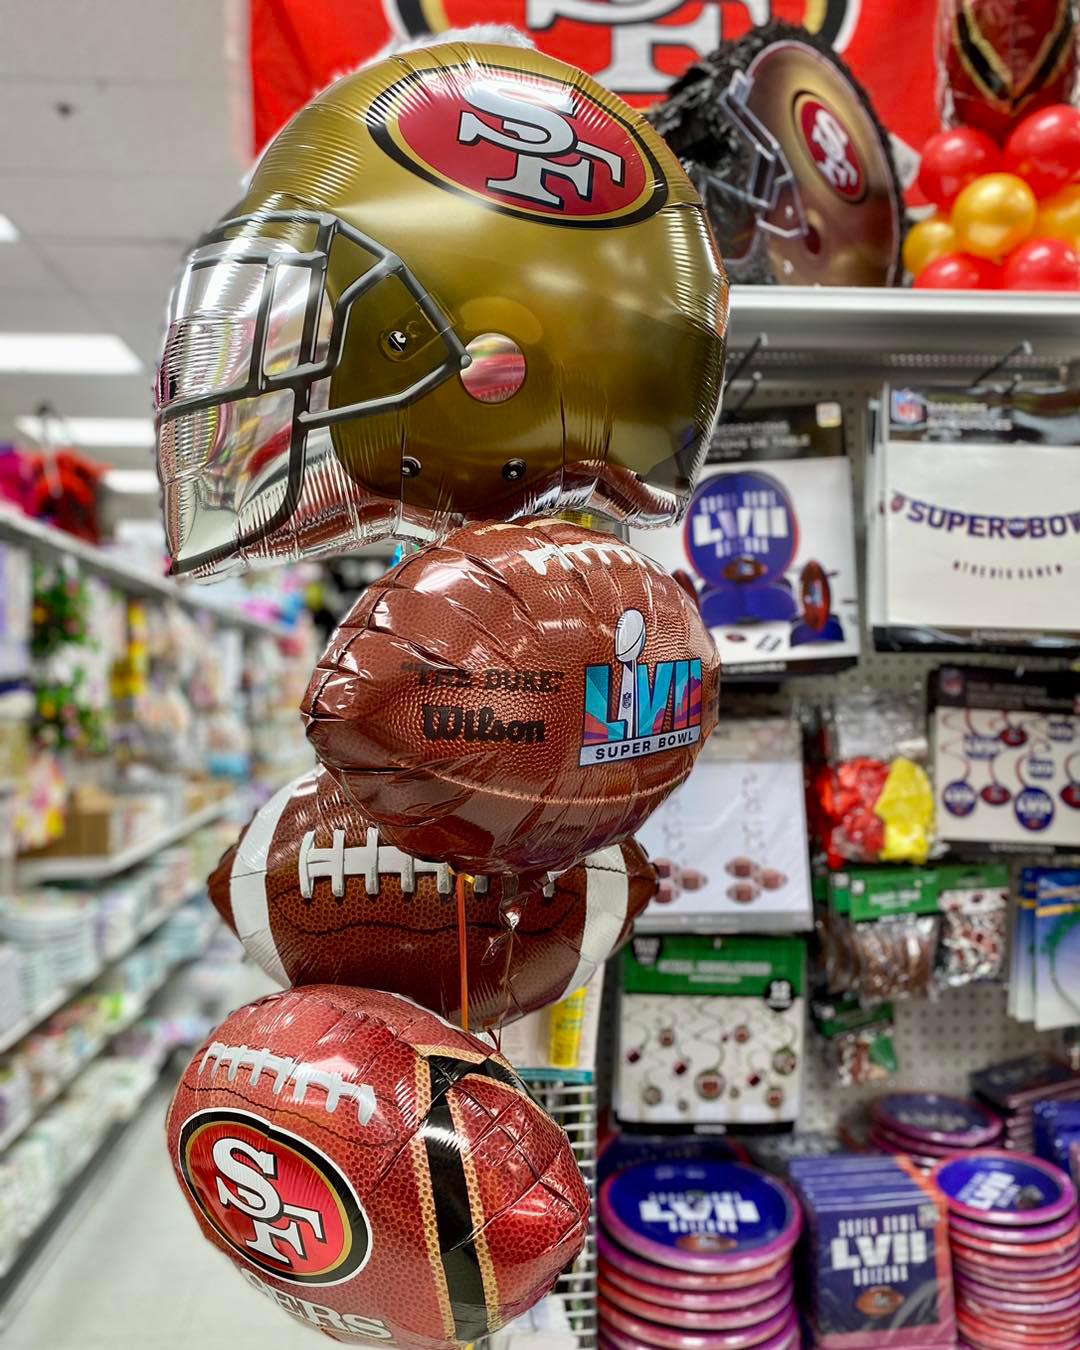 Get ready to cheer on the 49ers! We’ve got everything you need to celebrate the big game. Affordable Treasures Los Gatos (408)356-3101